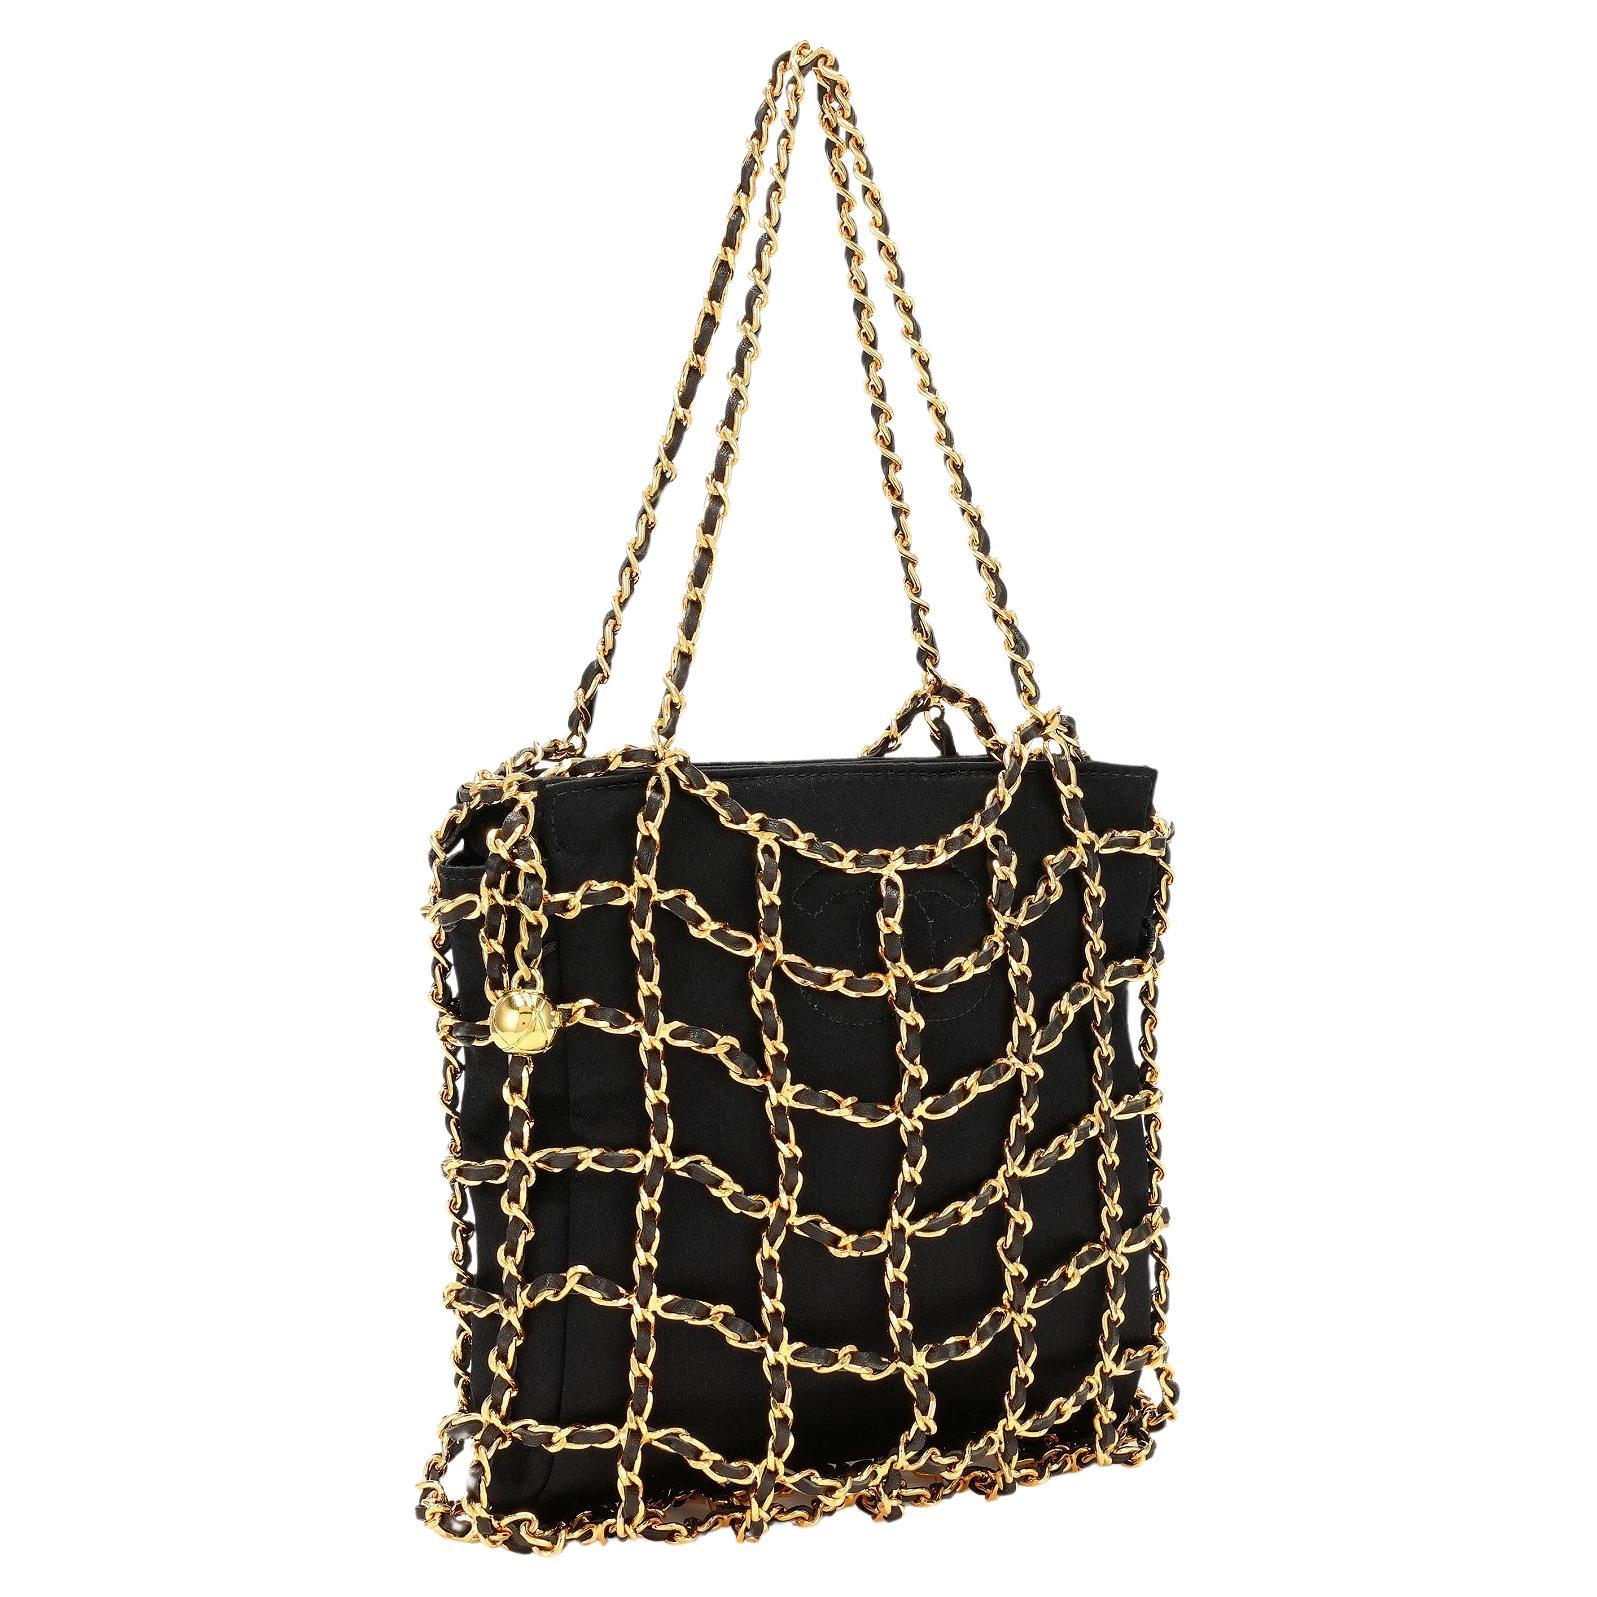 Chanel Rare Vintage Micro Mini Woven Chain Minaudière Clutch

1994 {VINTAGE 28 Years}
Gold hardware
Iconic cage throughout
Stitched CC logo at front
2 Interior zippered pockets
Satin bag: 10